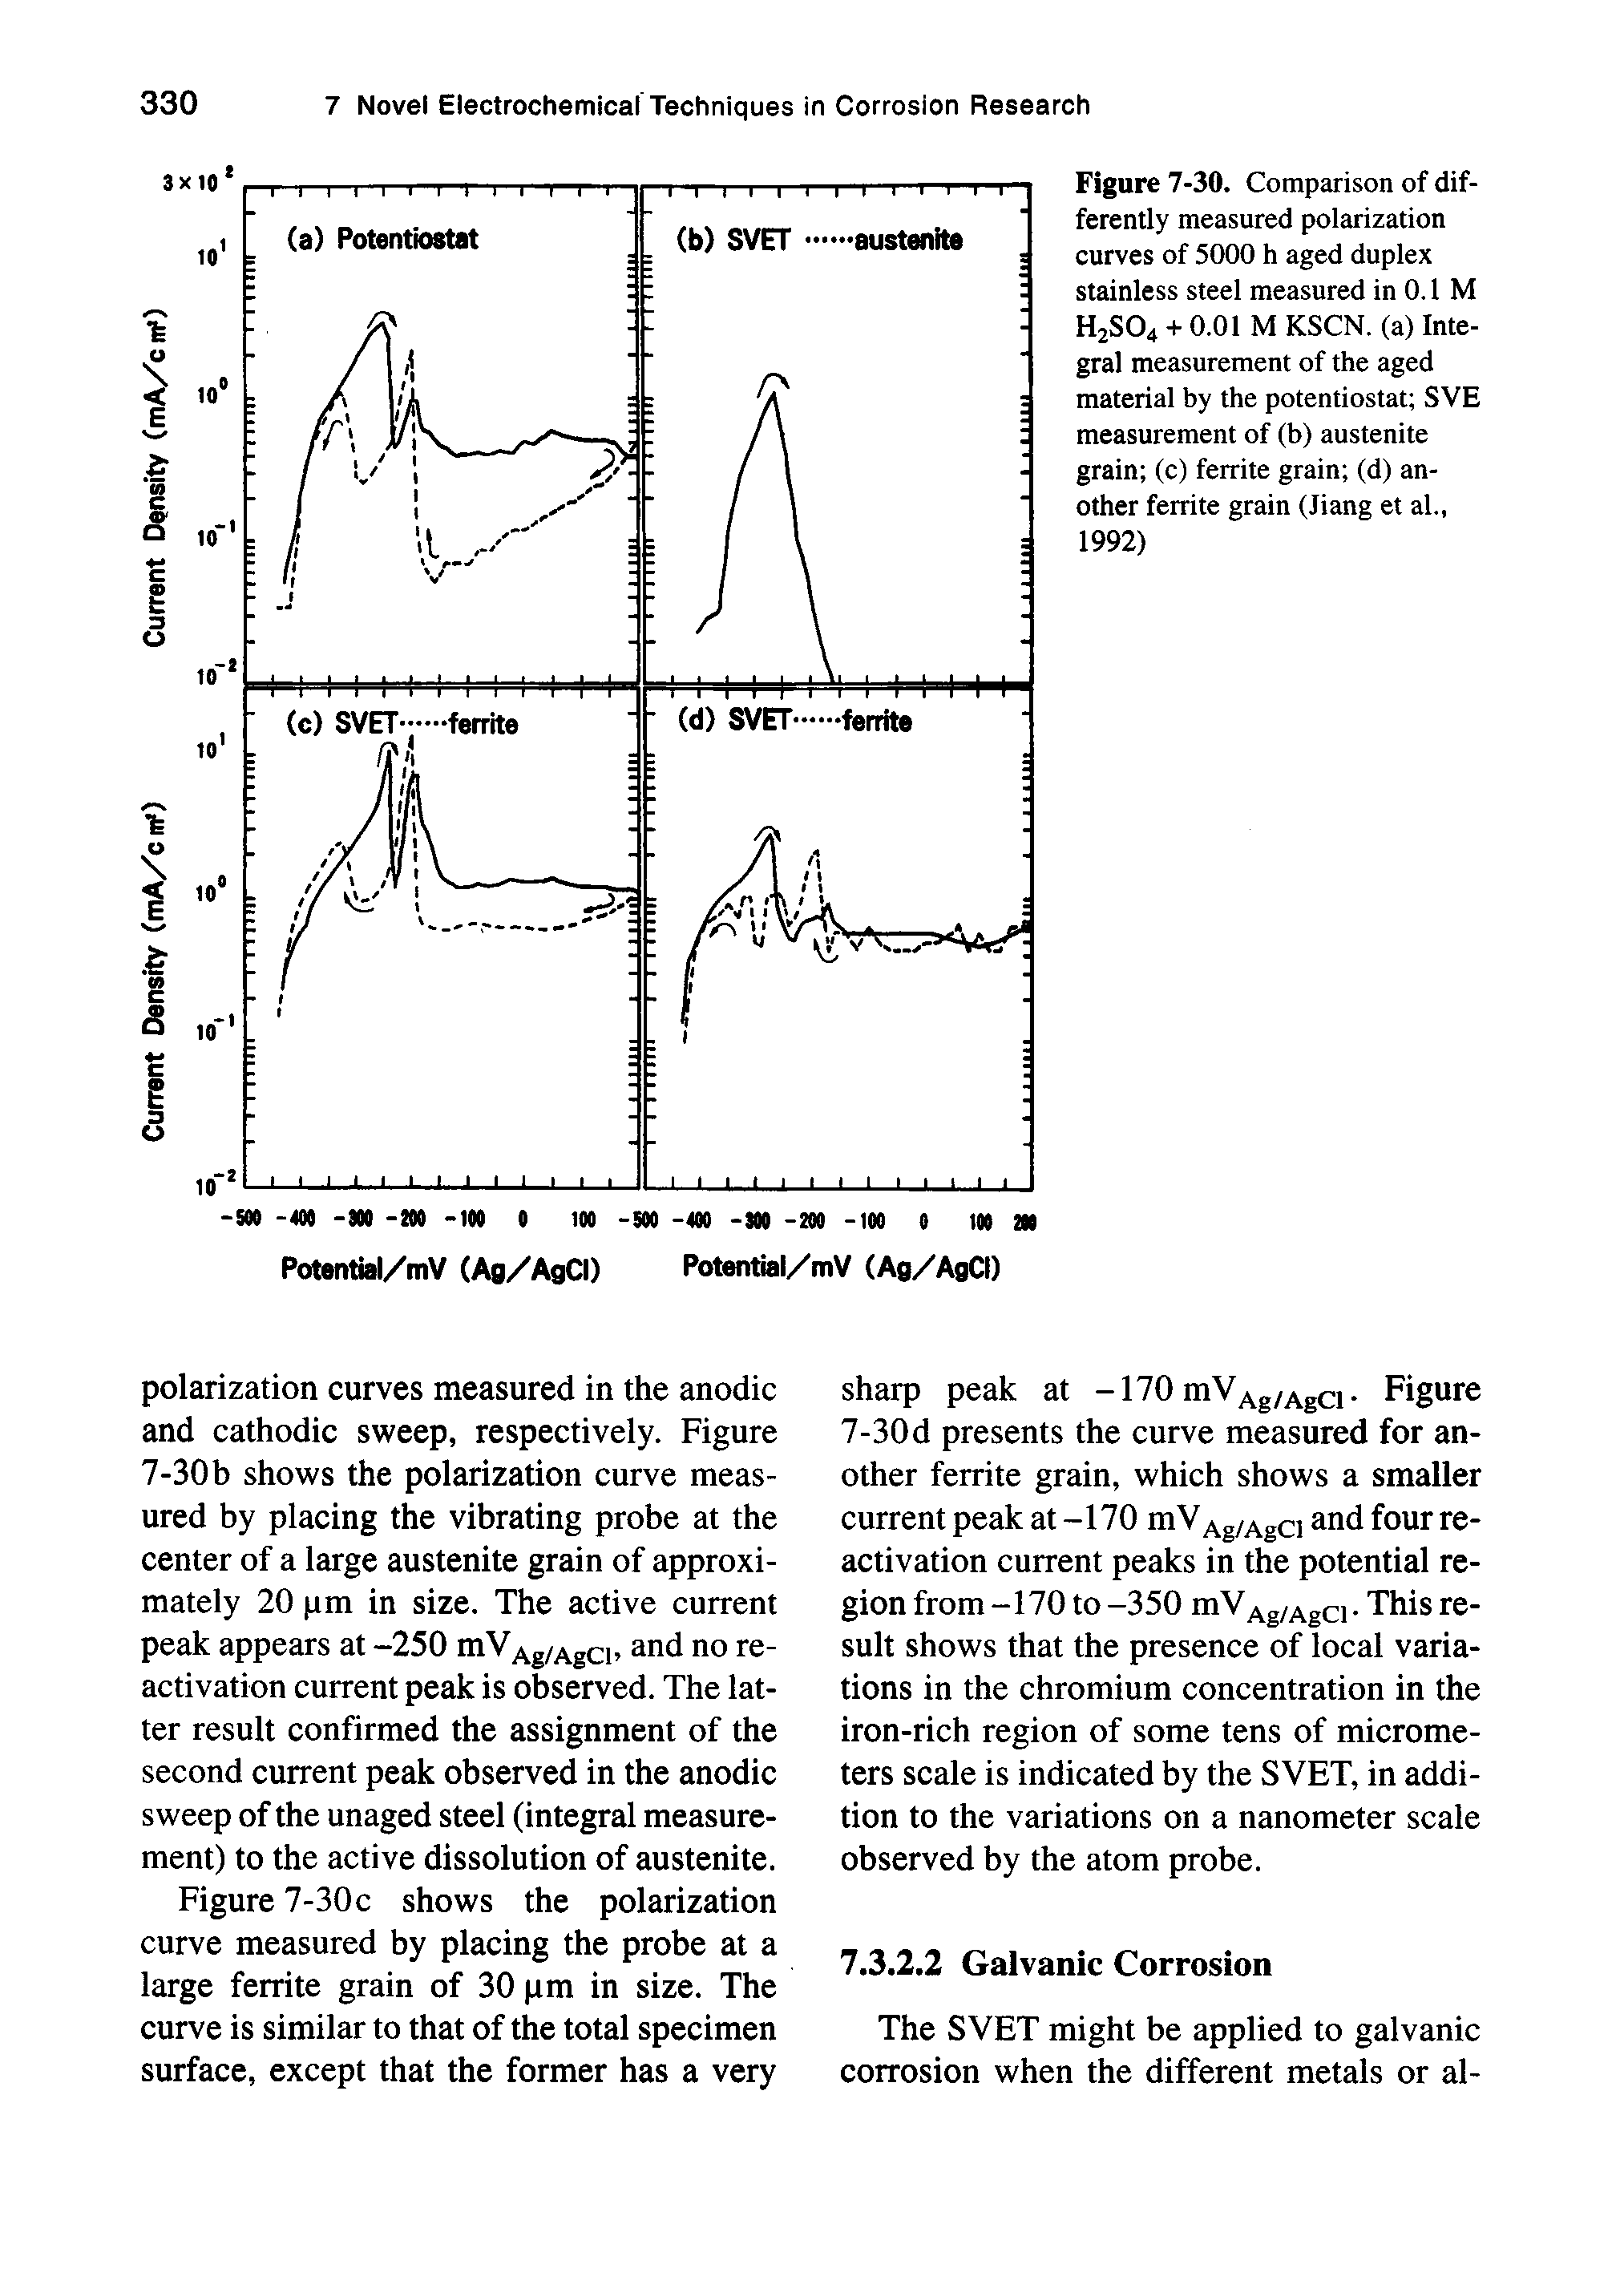 Figure 7-30. Comparison of differently measured polarization curves of 5000 h aged duplex stainless steel measured in 0.1 M H2SO4 + 0.01 M KSCN. (a) Integral measurement of the aged material by the potentiostat SVE measurement of (b) austenite grain (c) ferrite grain (d) another ferrite grain (Jiang et al., 1992)...